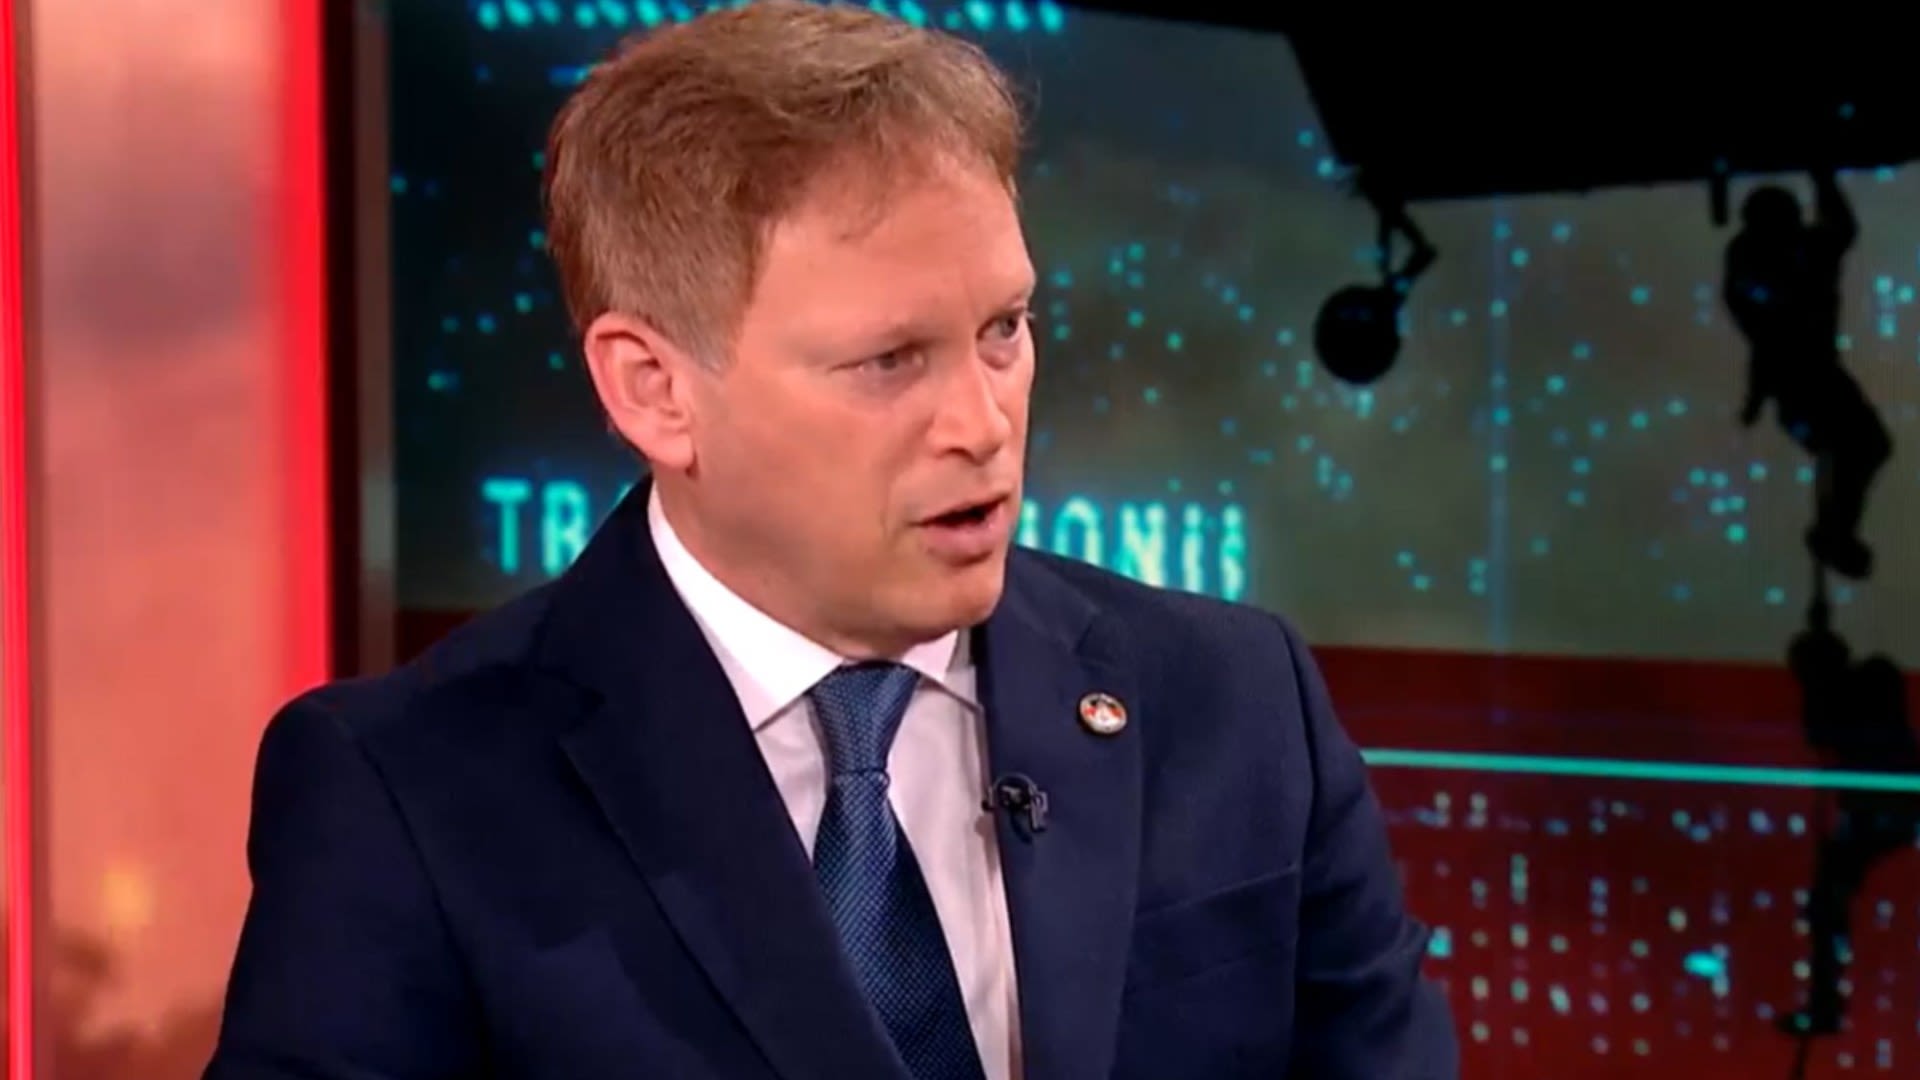 If Putin wins in Ukraine - it won’t just be the West that's next, warns Shapps